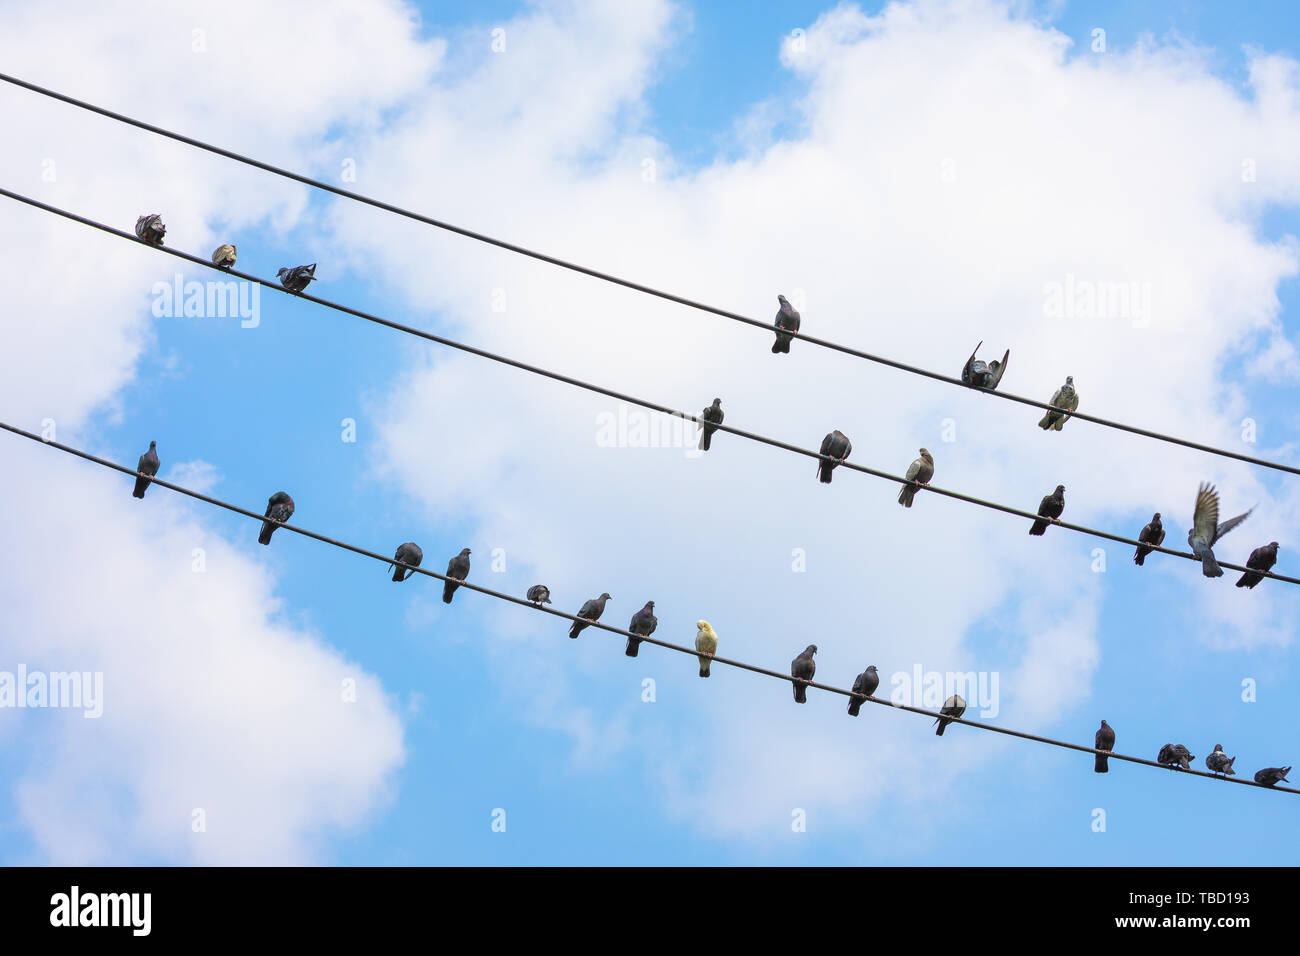 Pigeons on the wire against the blue sky Stock Photo